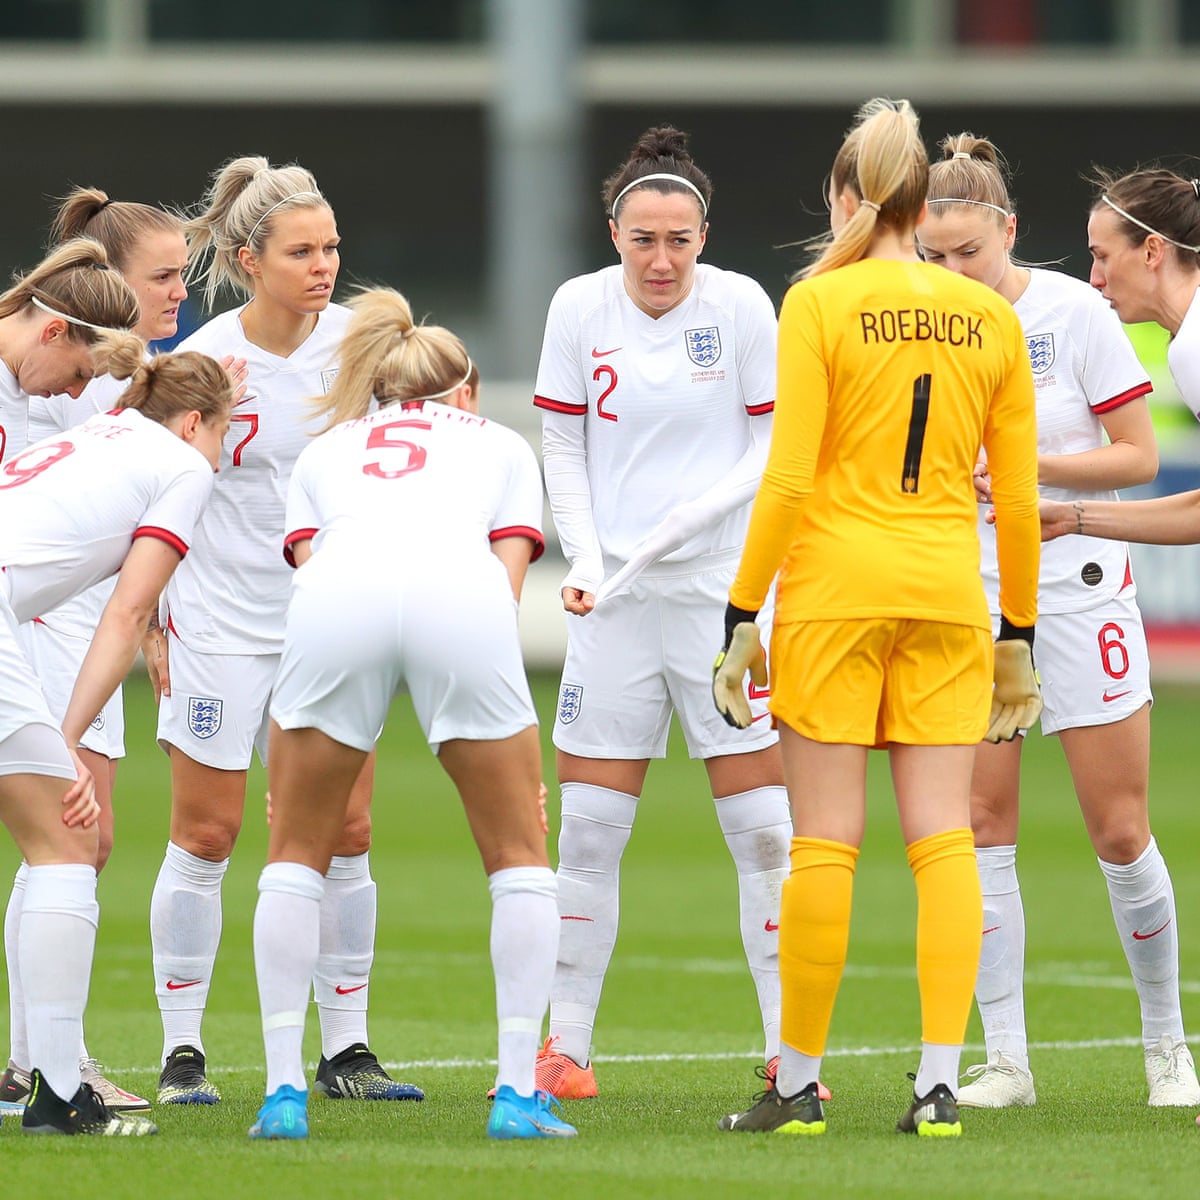 England Women's All White XI Shines Light On A Deep Rooted Problem. Women's Football